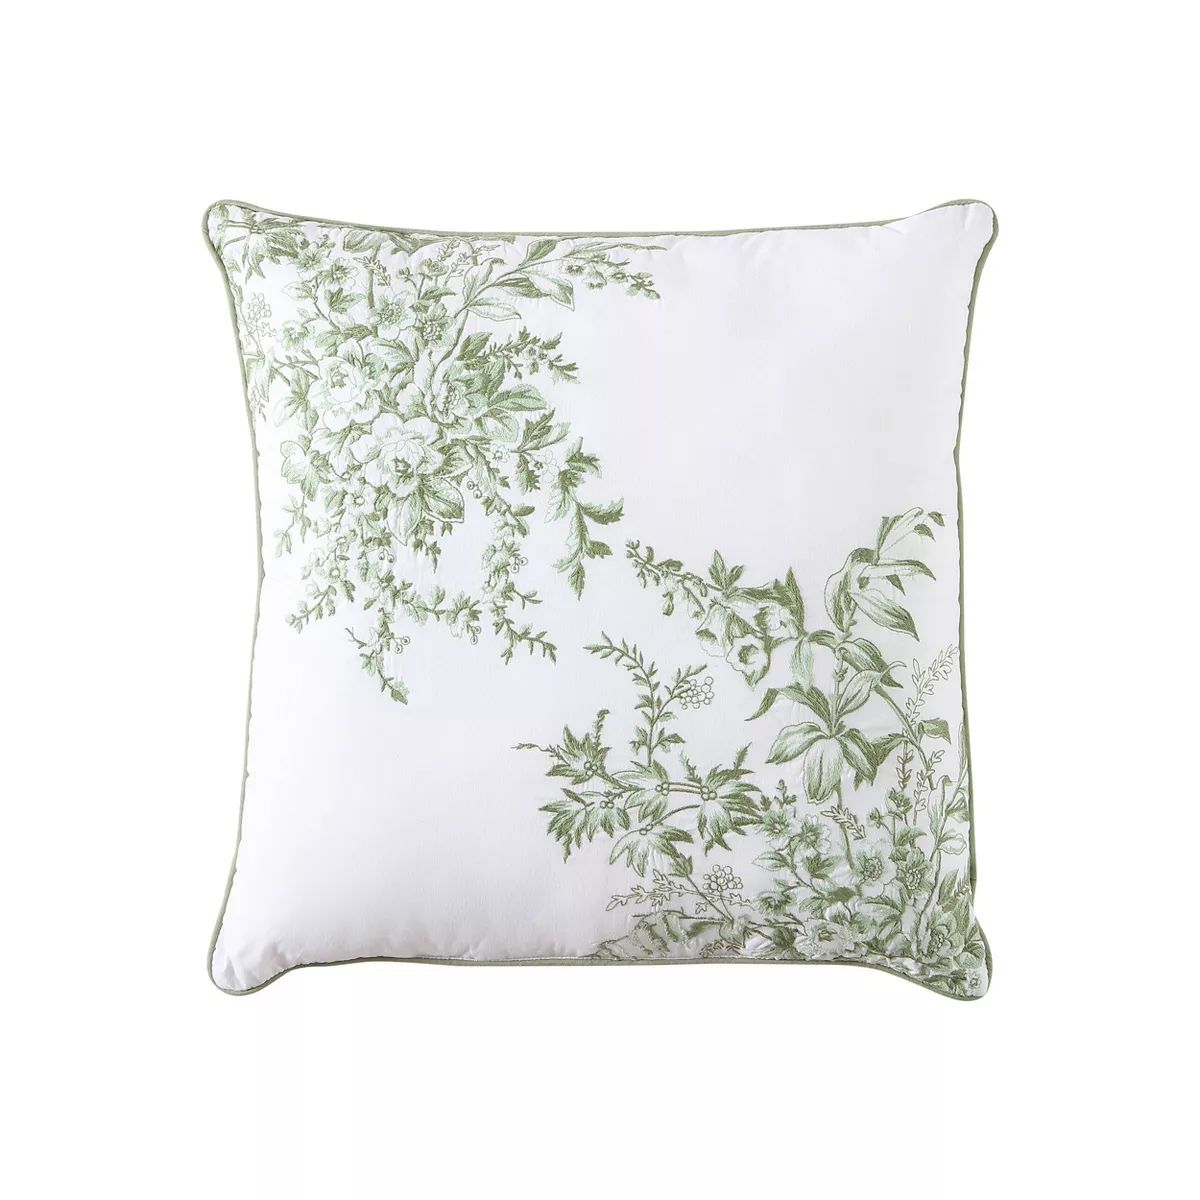 20" X 20" Laura Ashley Bedford Square Throw Pillow | Target